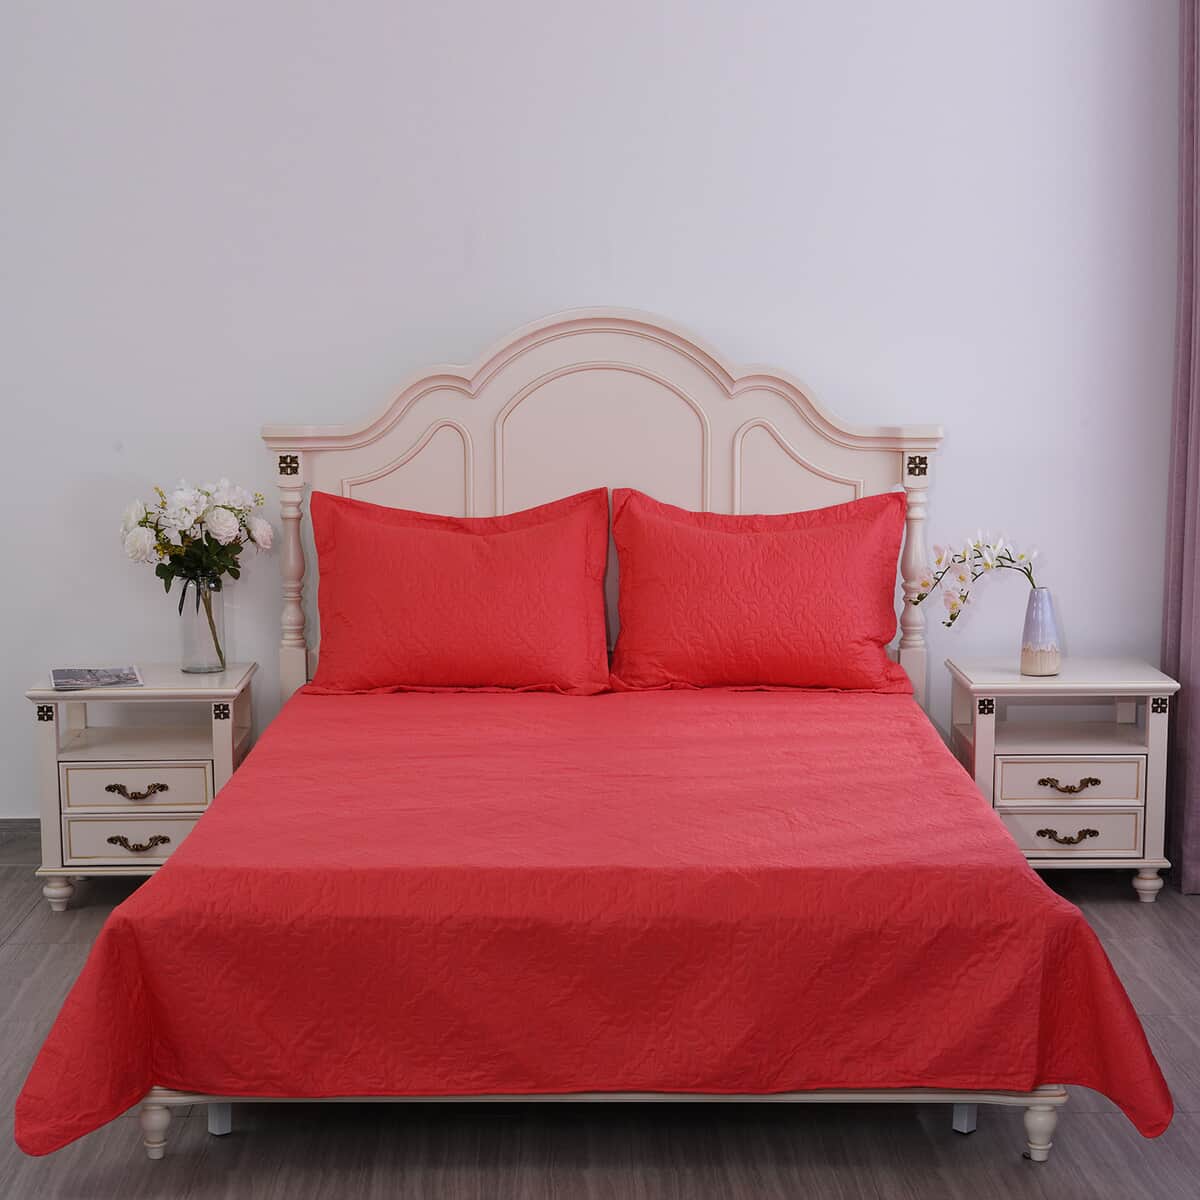 Homesmart 3 Pcs Solid Red Pinsonic Quilt Bedding Set - King Size image number 1